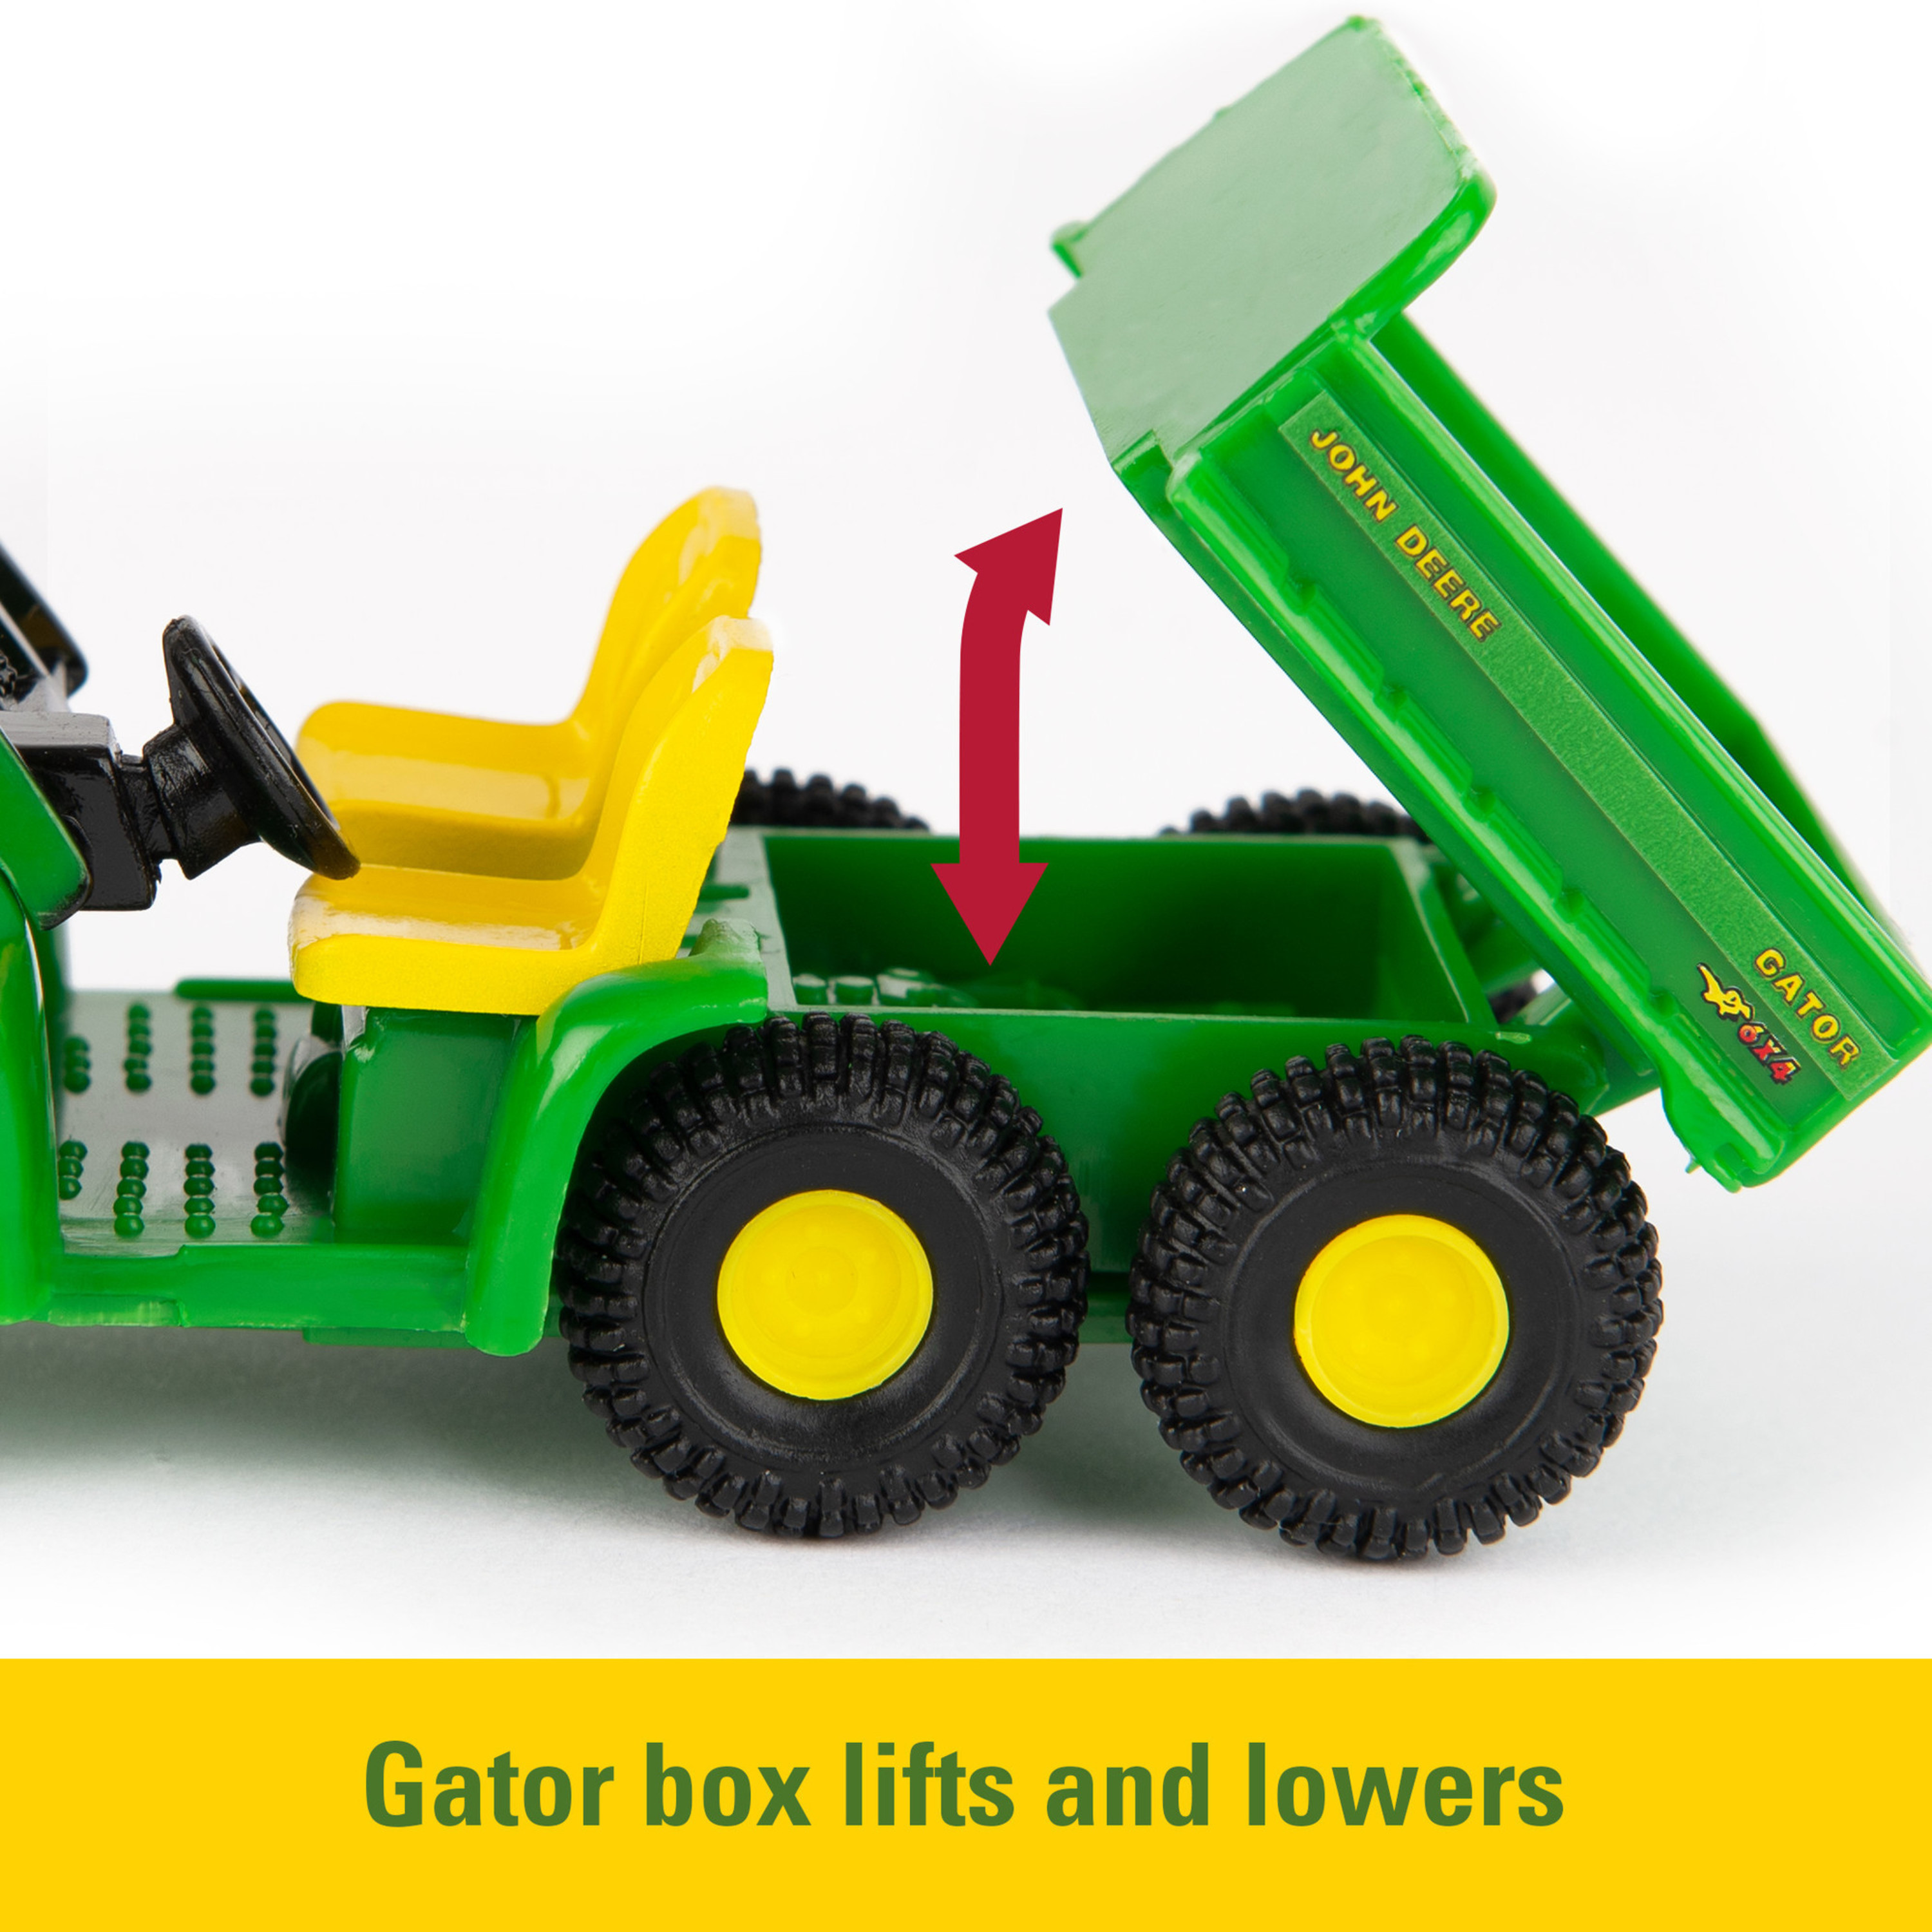 John Deere Tractor Toy Carry Case Value Farm Vehicle Playset, with Handle (18 Pieces) - image 4 of 7